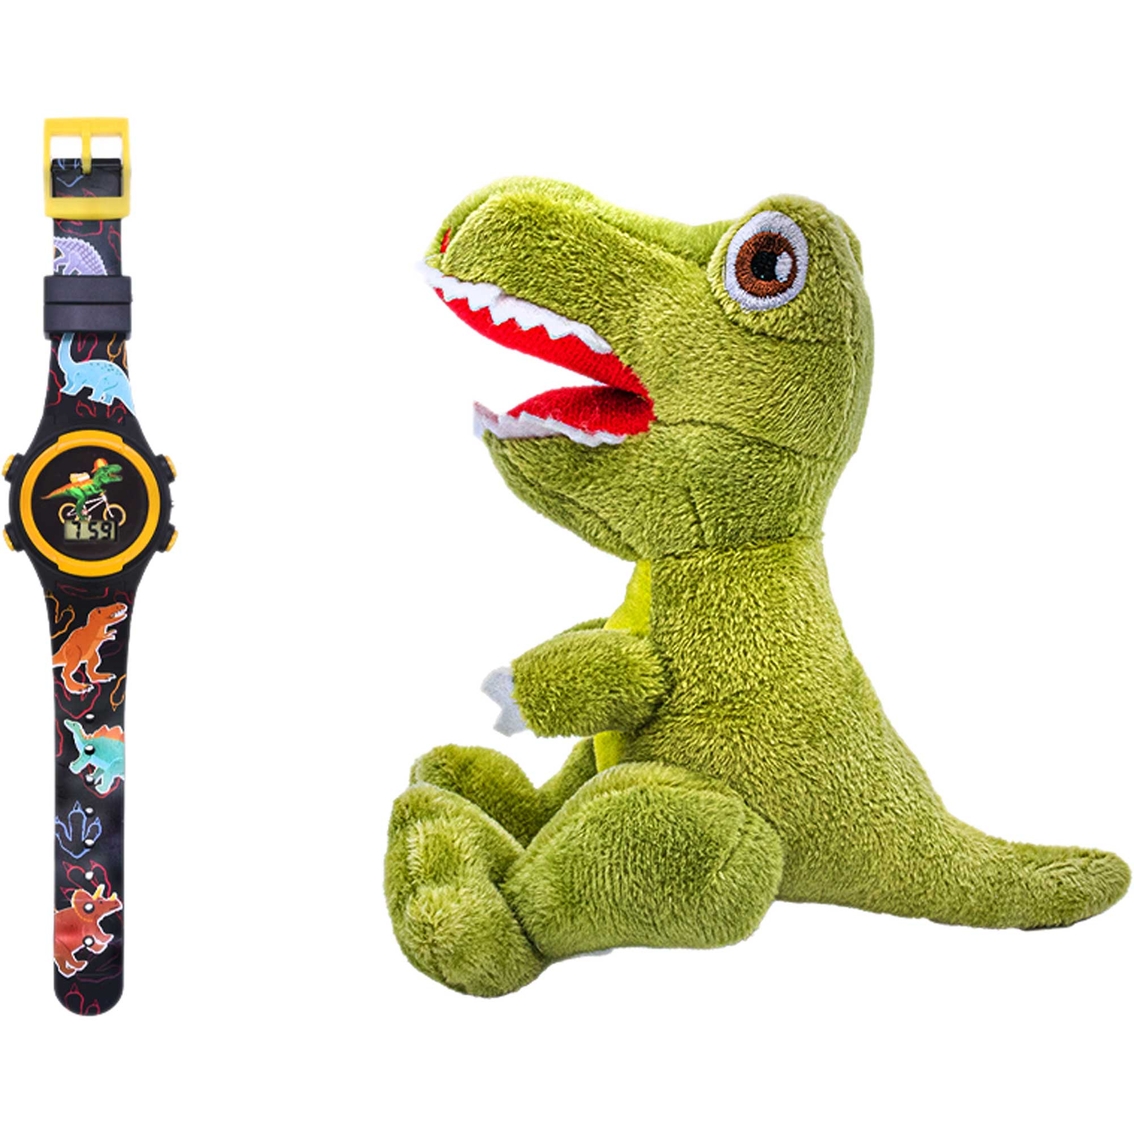 Play Zoom LCD Watch and Green Dinosaur Plush Set - Image 2 of 2